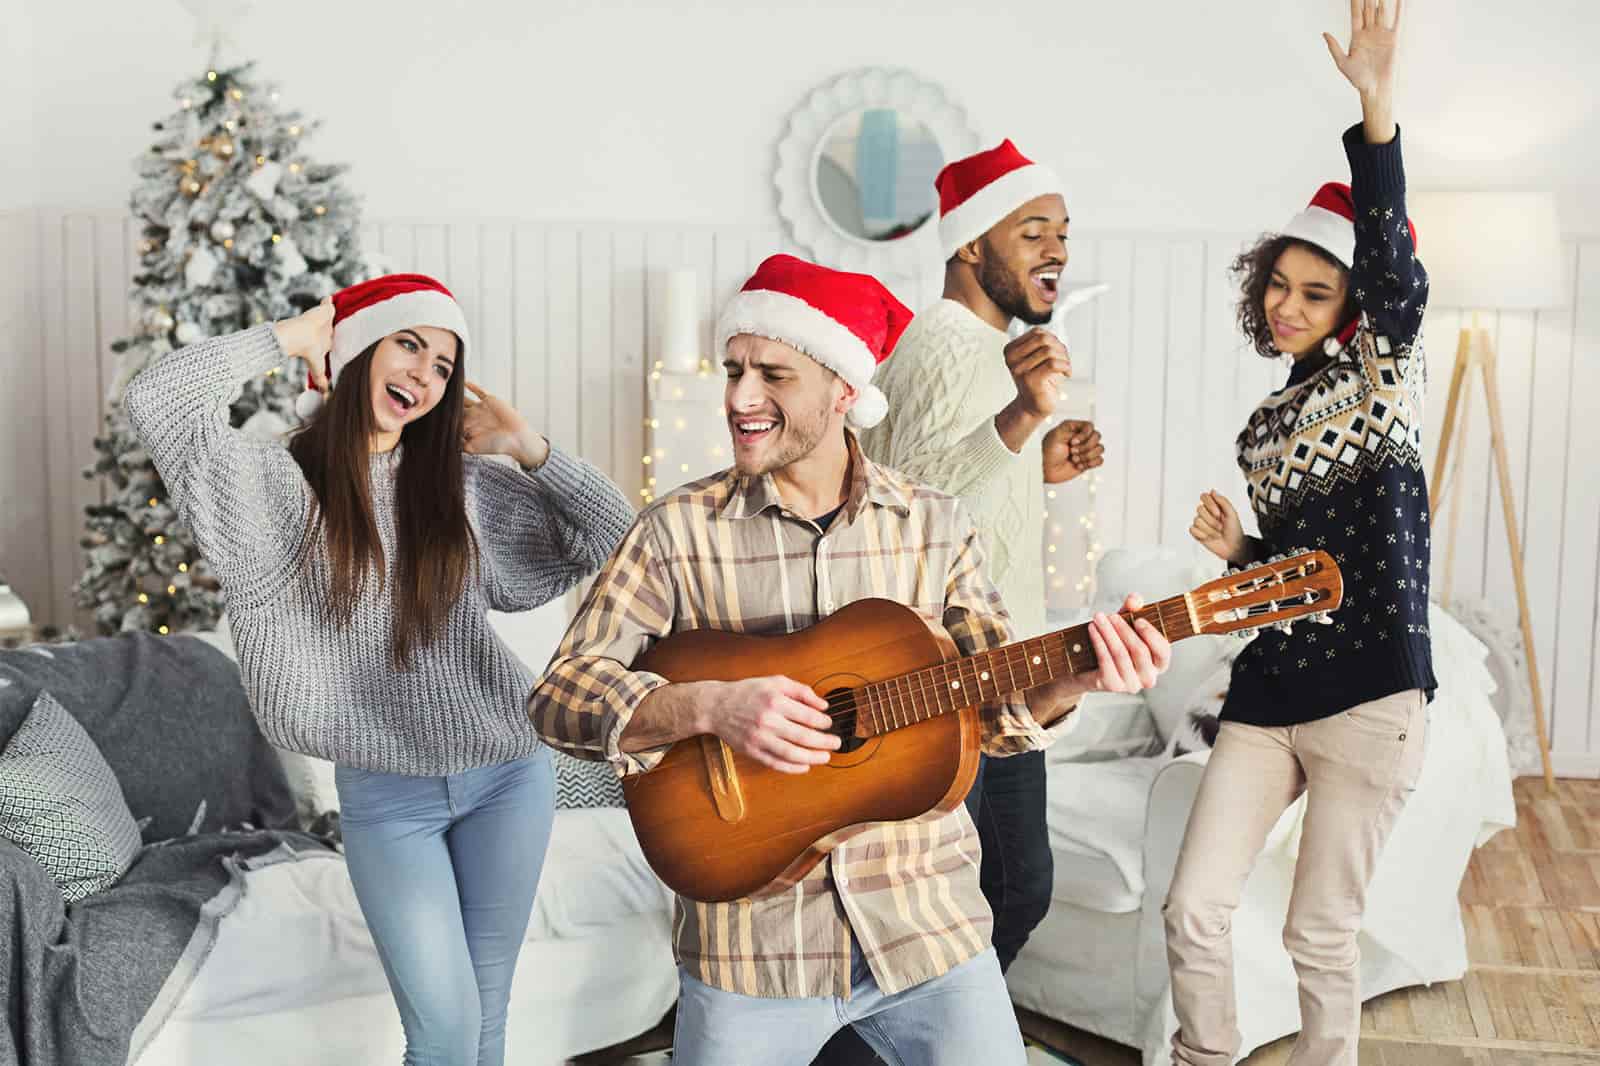 sing along christmas songs with friends - sirius xm christmas channel